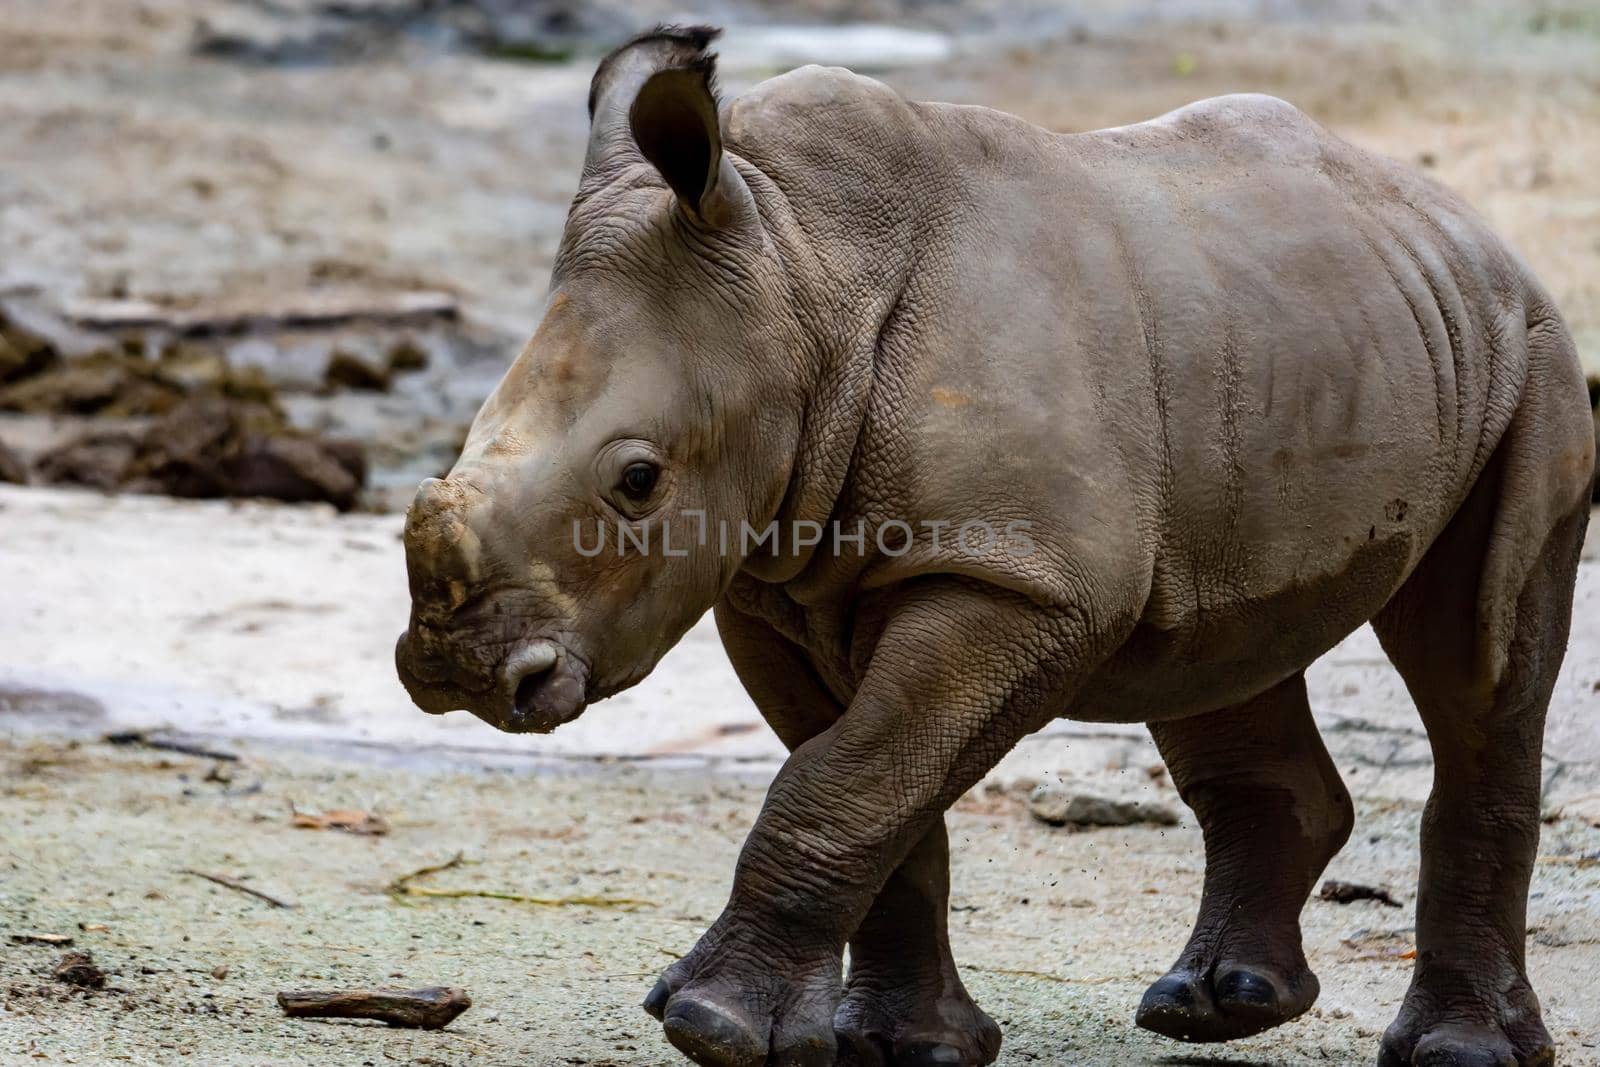 A closeup shot of a baby white rhinoceros or square-lipped rhino Ceratotherium simum while playing in a park in singapore by billroque